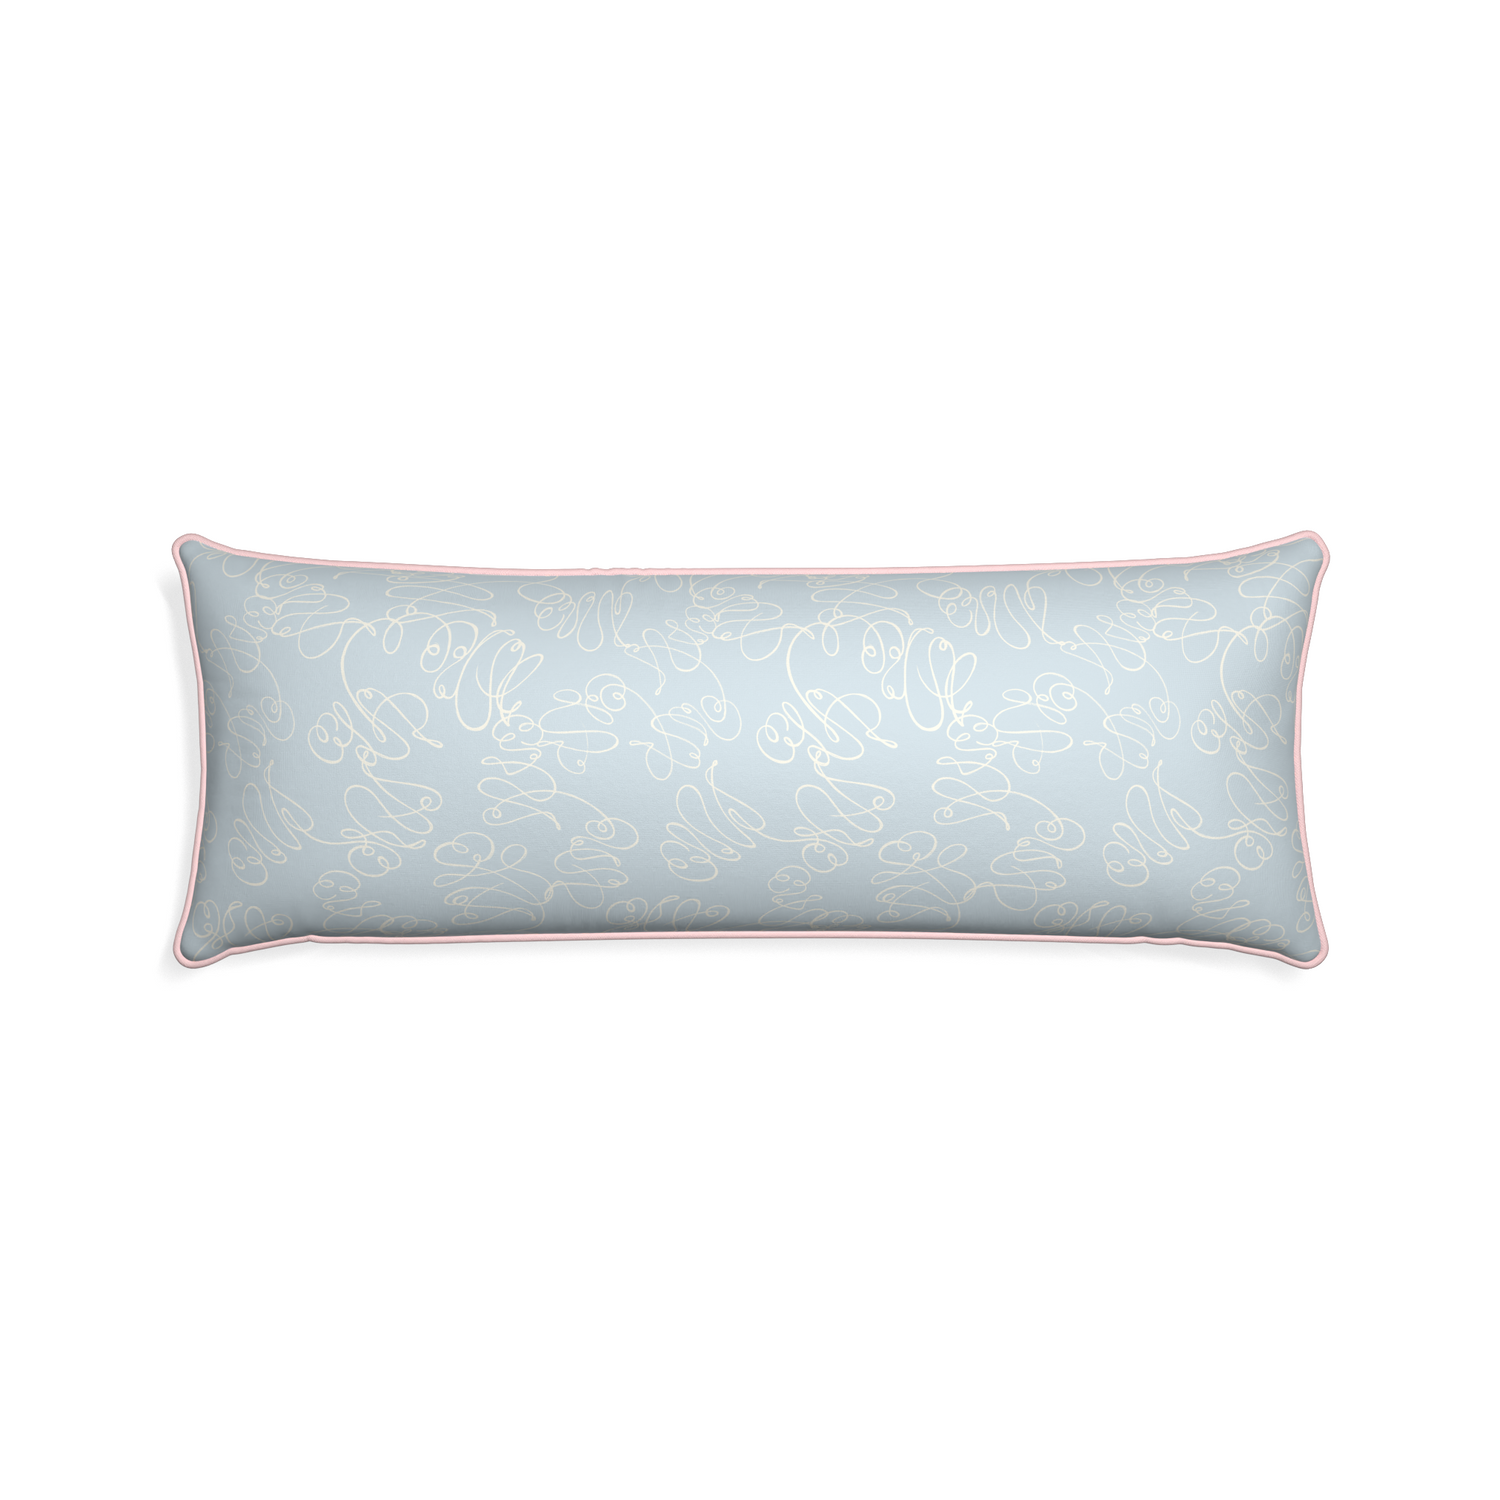 Xl-lumbar mirabella custom powder blue abstractpillow with petal piping on white background